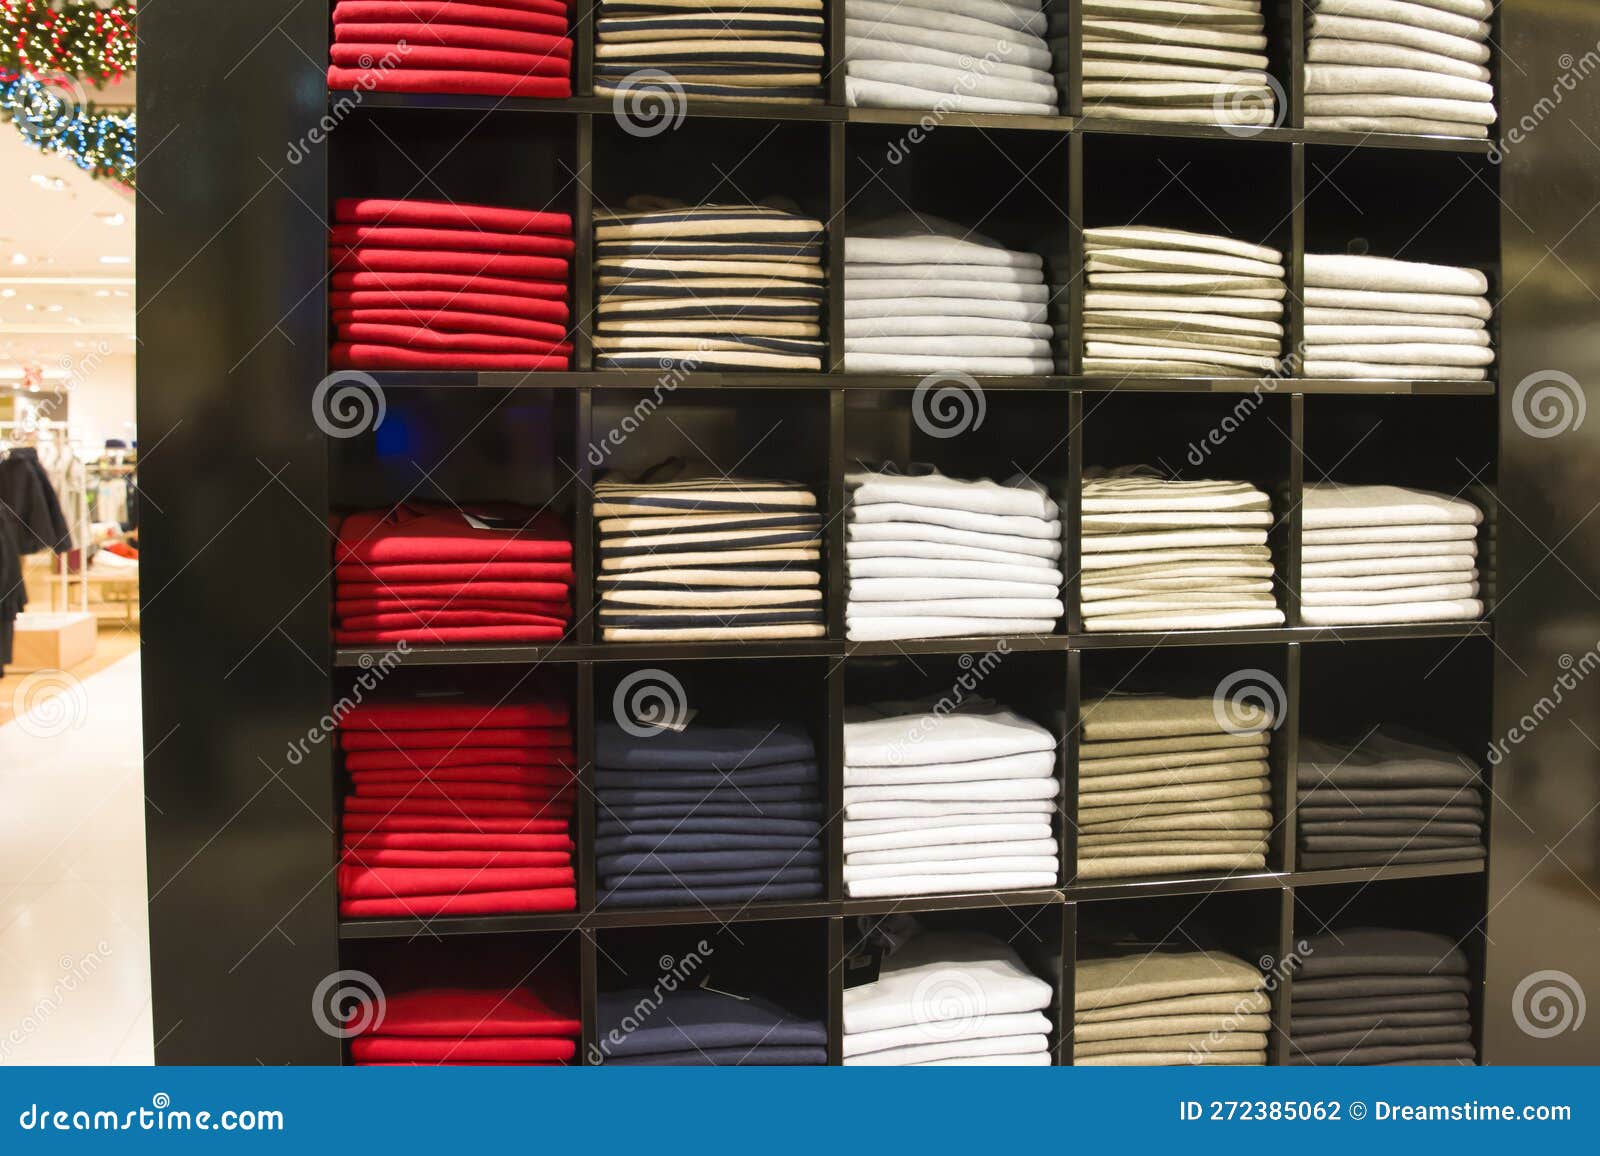 A Row of Folded Jackets on a Shelf in a Store Stock Photo - Image of ...